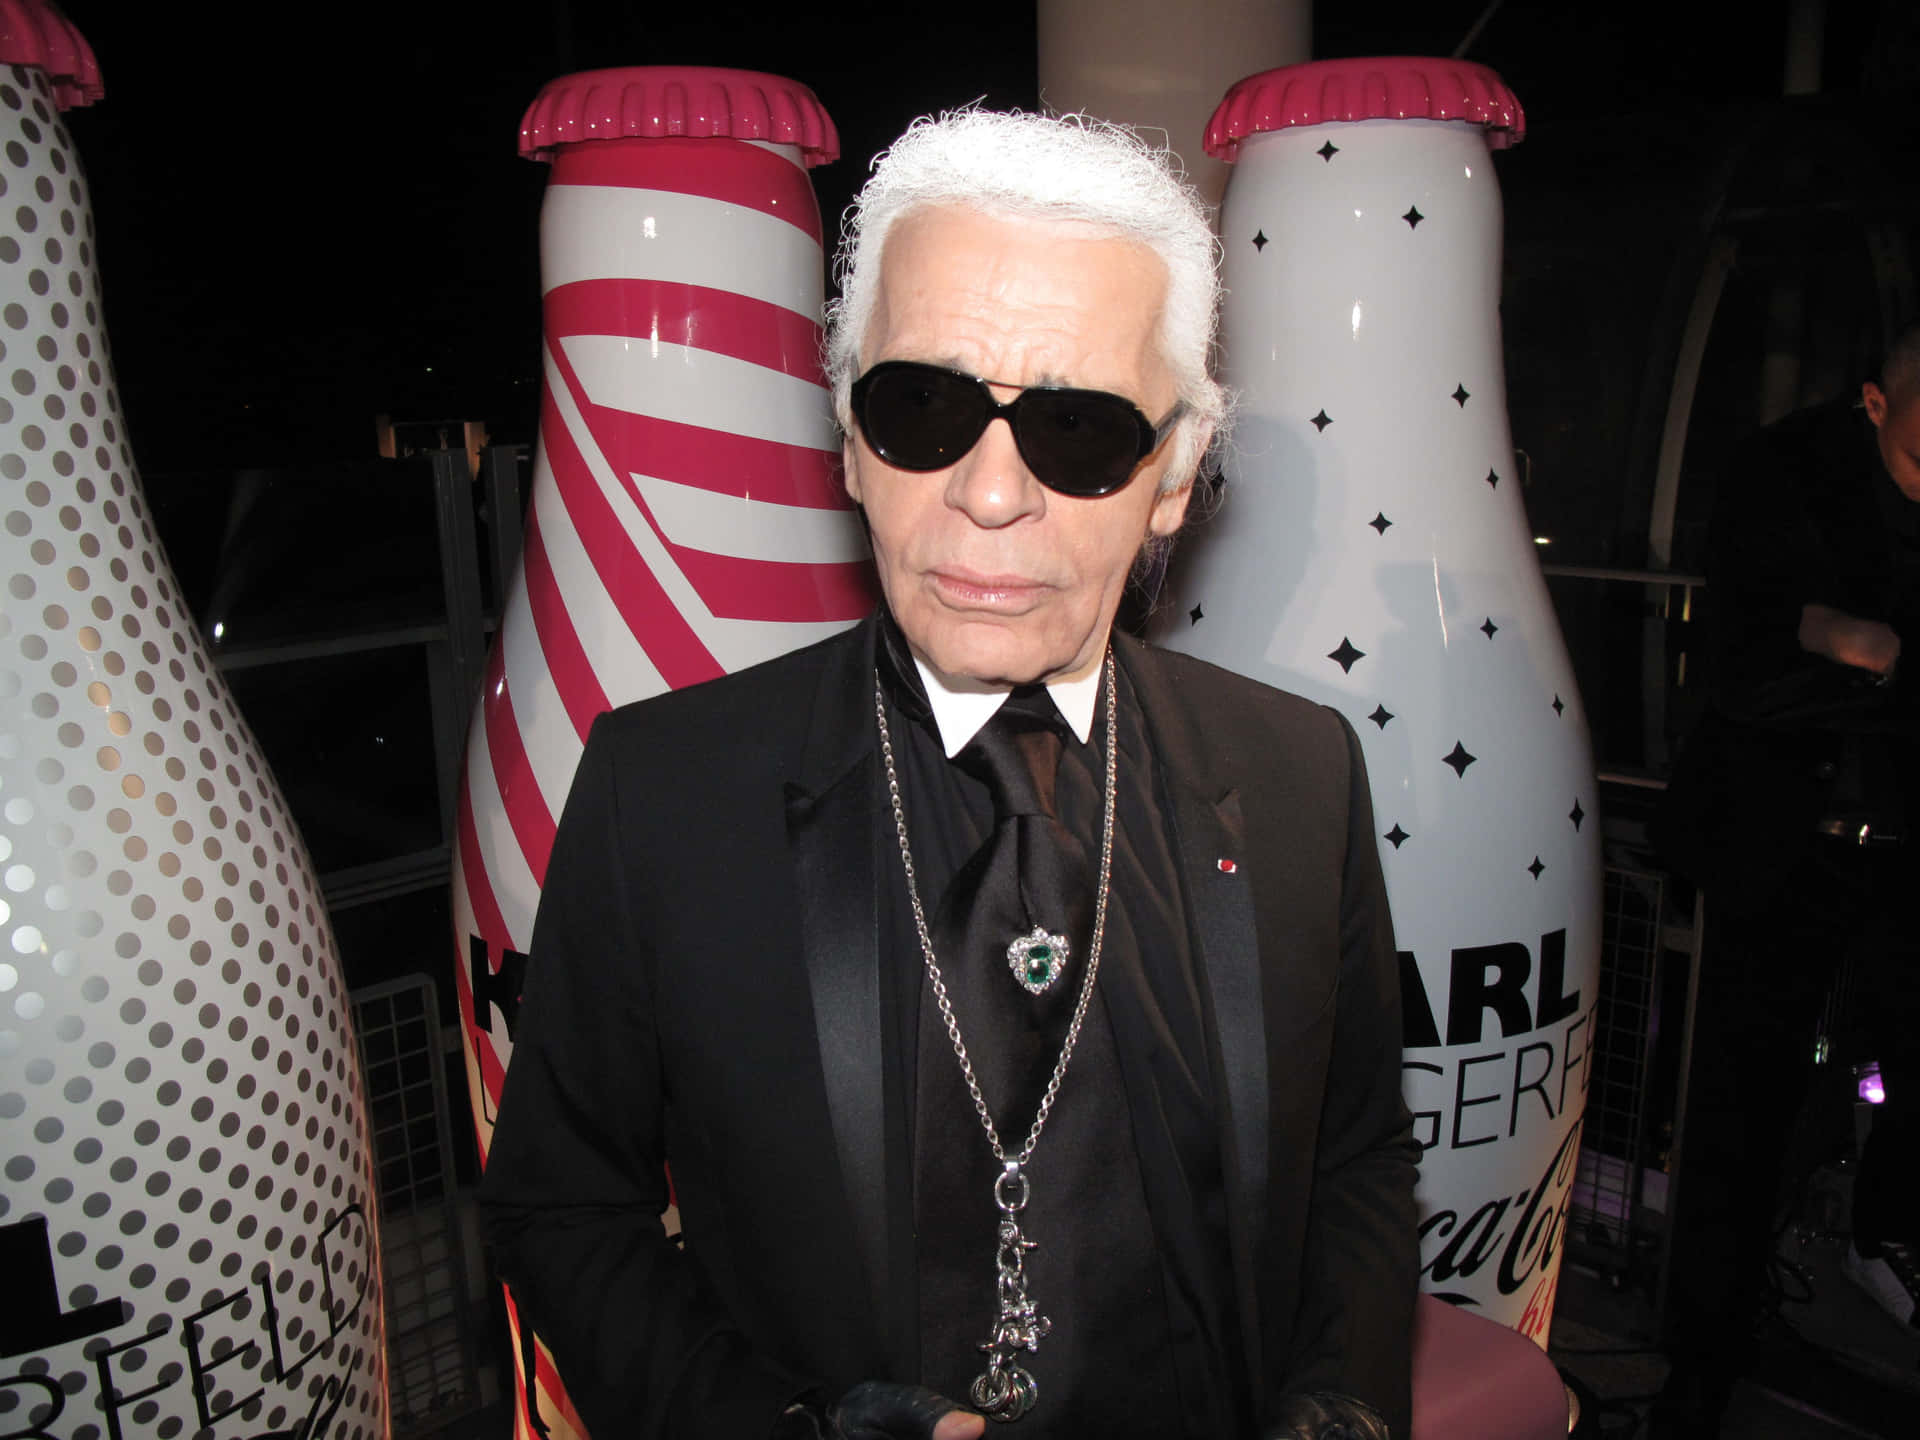 "The iconic Karl Lagerfeld" Wallpaper